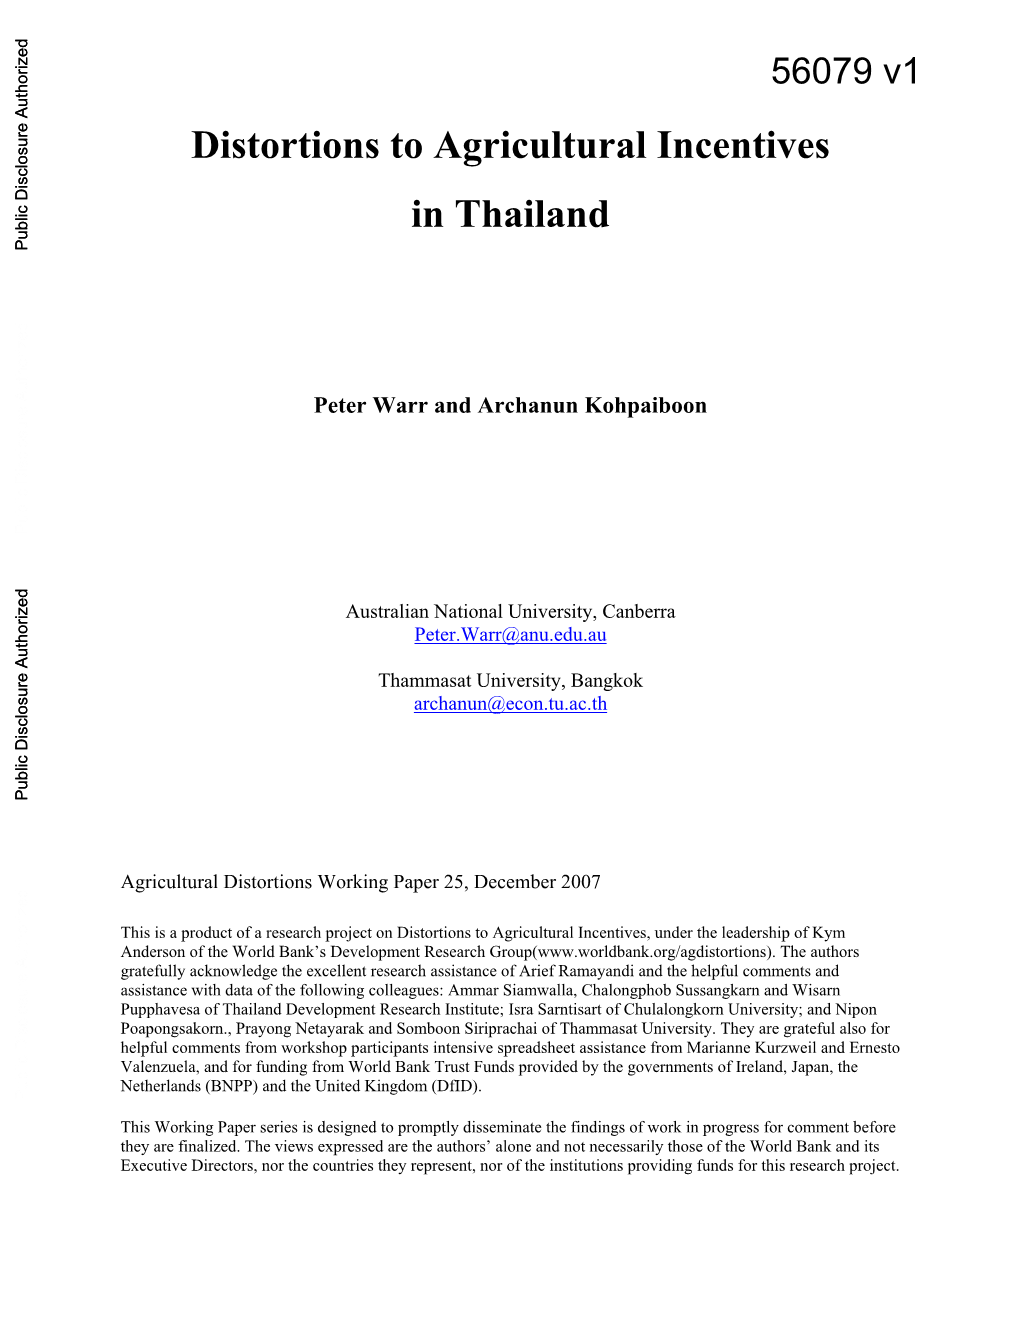 Distortions to Agricultural Incentives in Thailand Public Disclosure Authorized